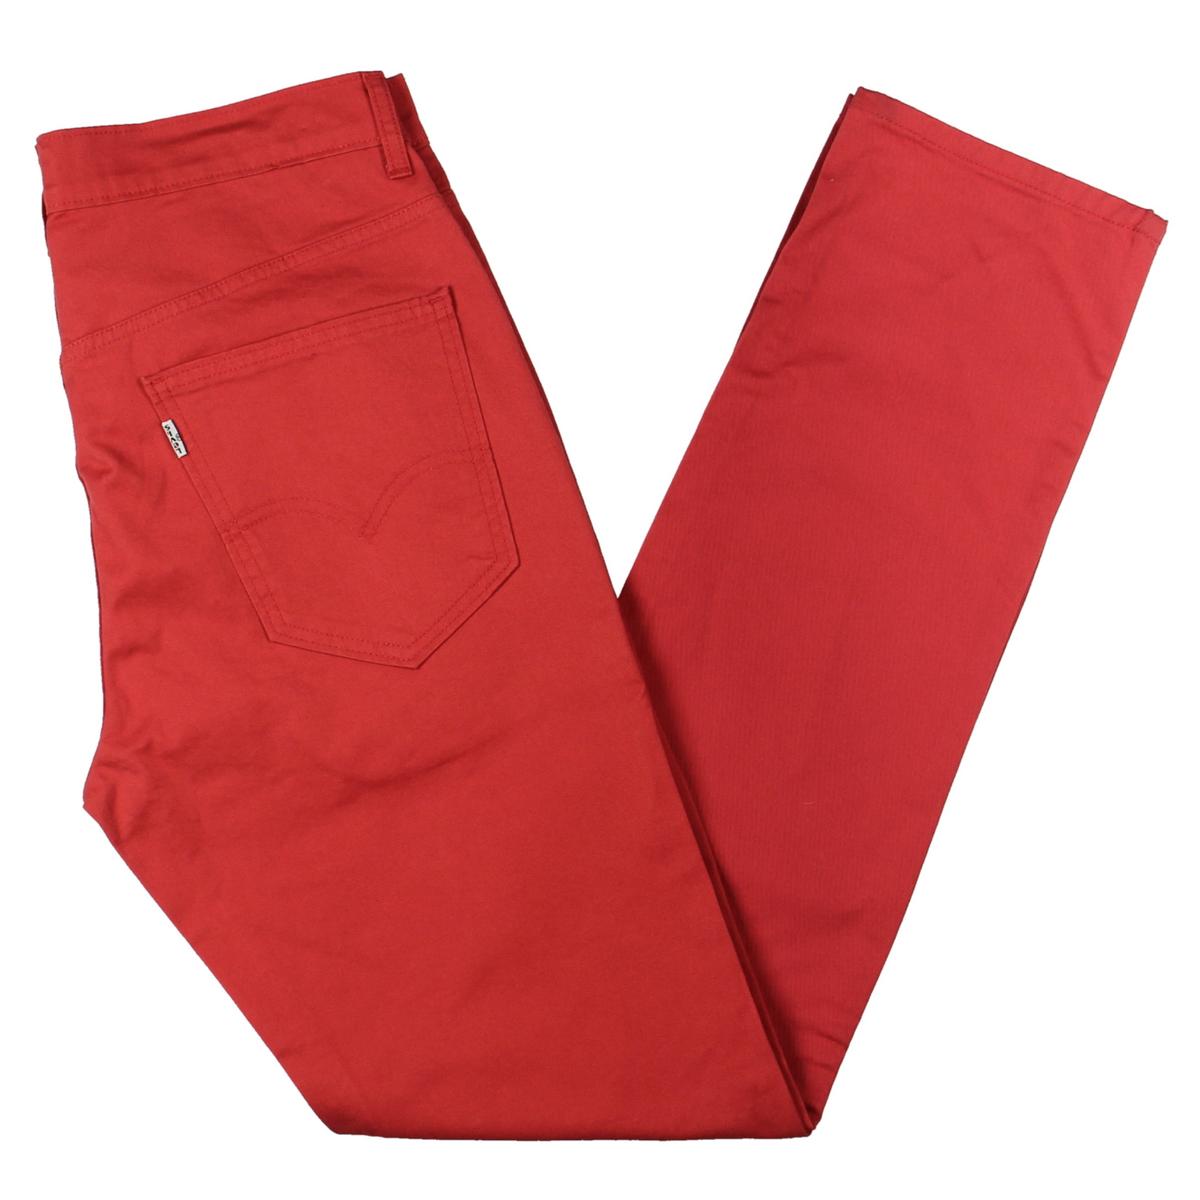 Levi's Mens 511 Red Slim Fit Casual Hybrid Trouser Pants 28/30 BHFO ...